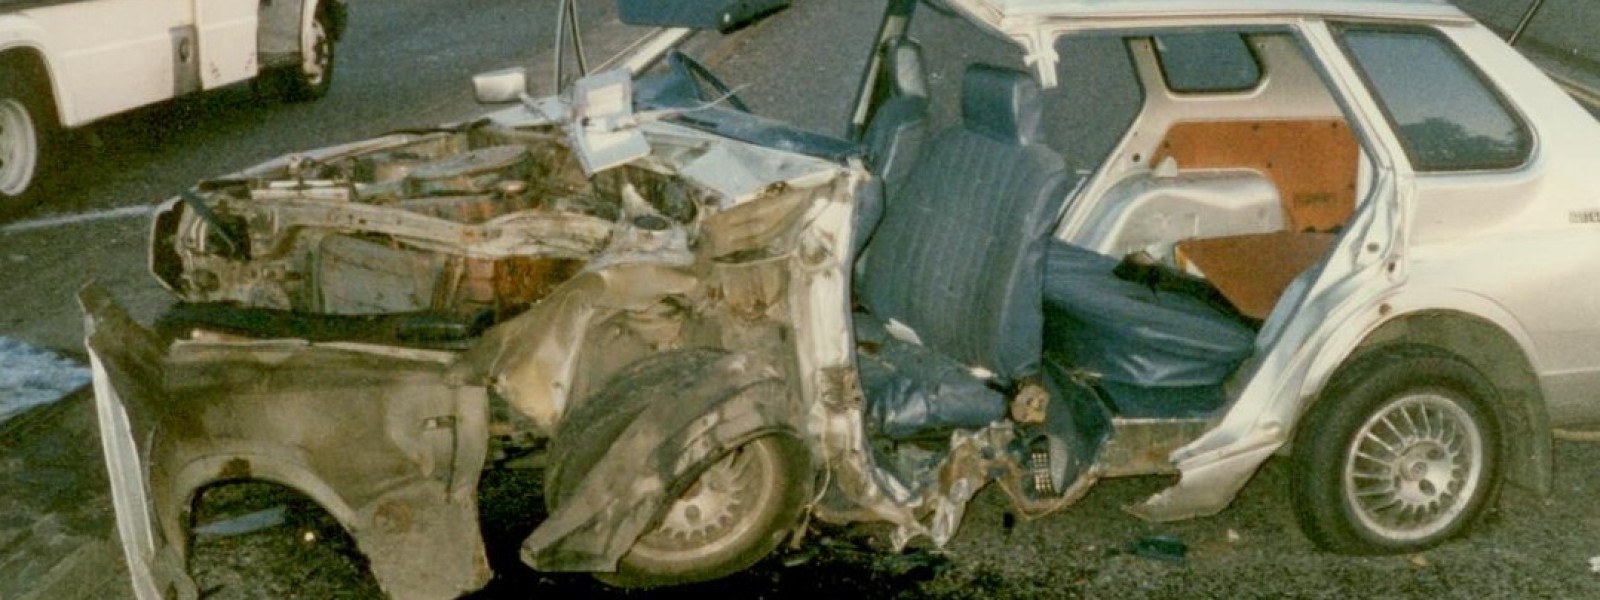 The side of the completely wrecked car in June 1989 that Clive, Jess and their friends were in